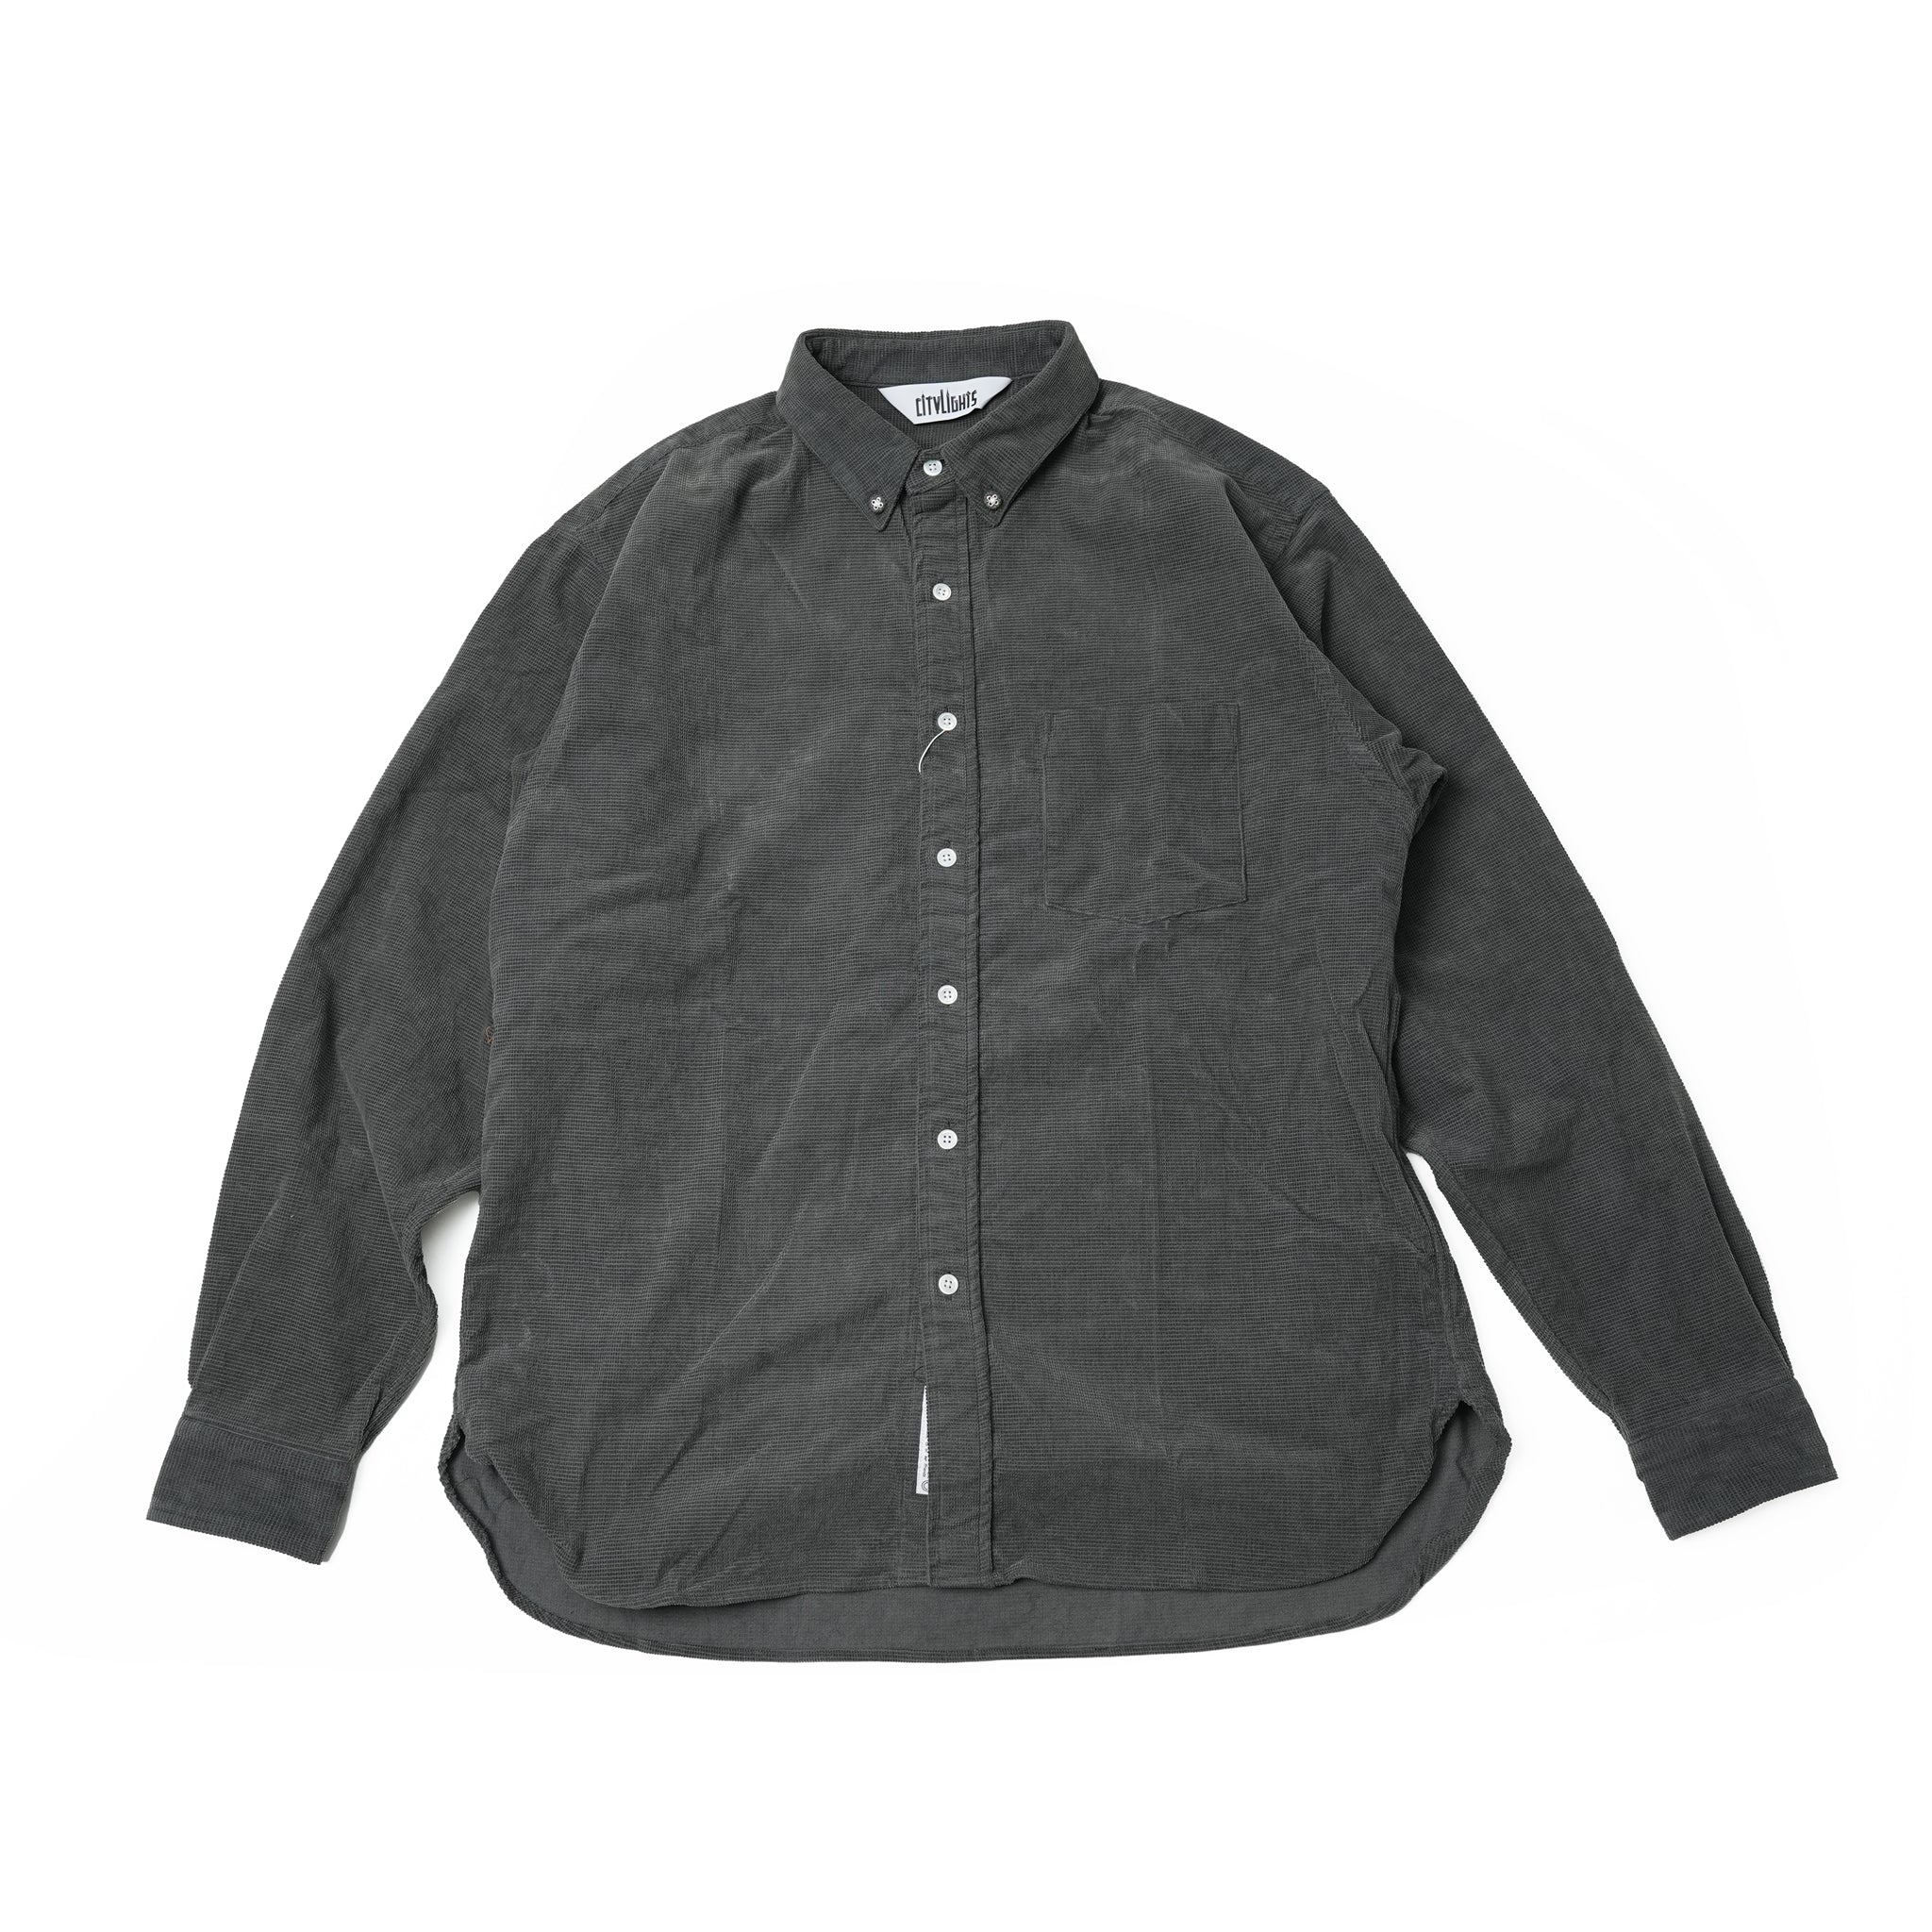 Name: BD SHIRTS | Color:Cord | Size:Regular 【CITYLIGHTS PRODUCTS_シティライツプロダクツ】